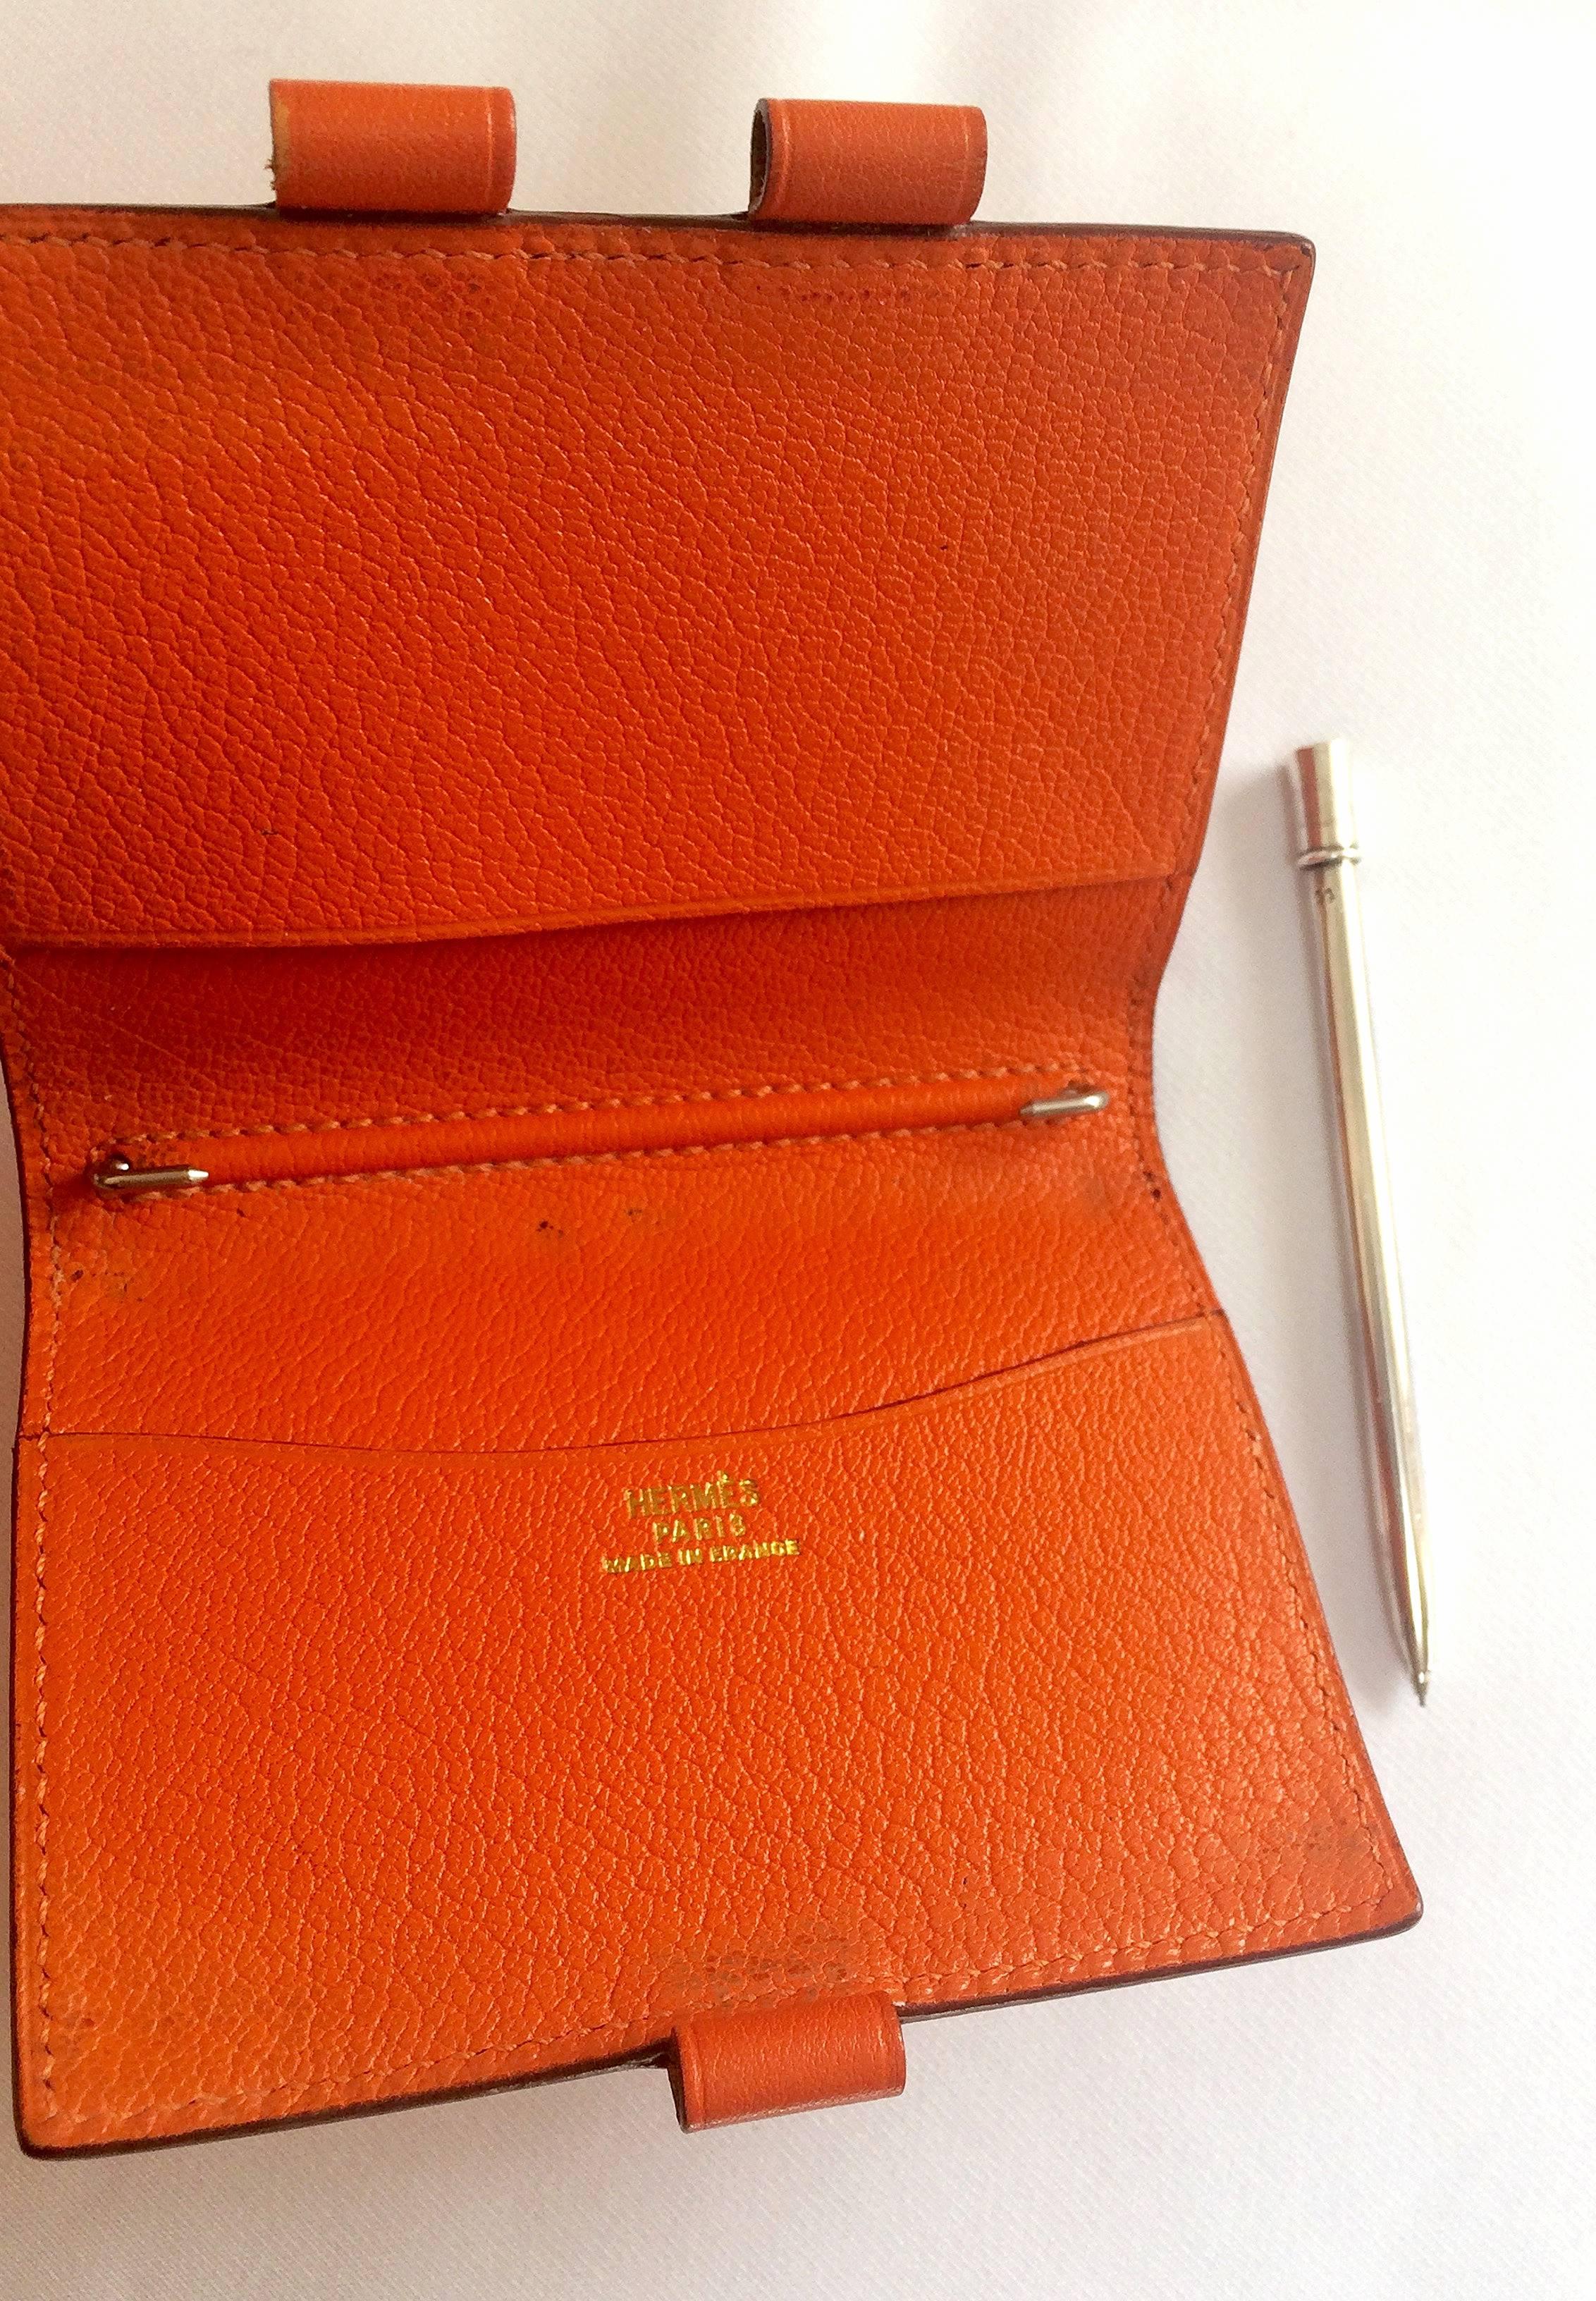 Vintage HERMES orange leather diary, schedule book cover PM with silver pencil In Good Condition For Sale In Kashiwa, Chiba